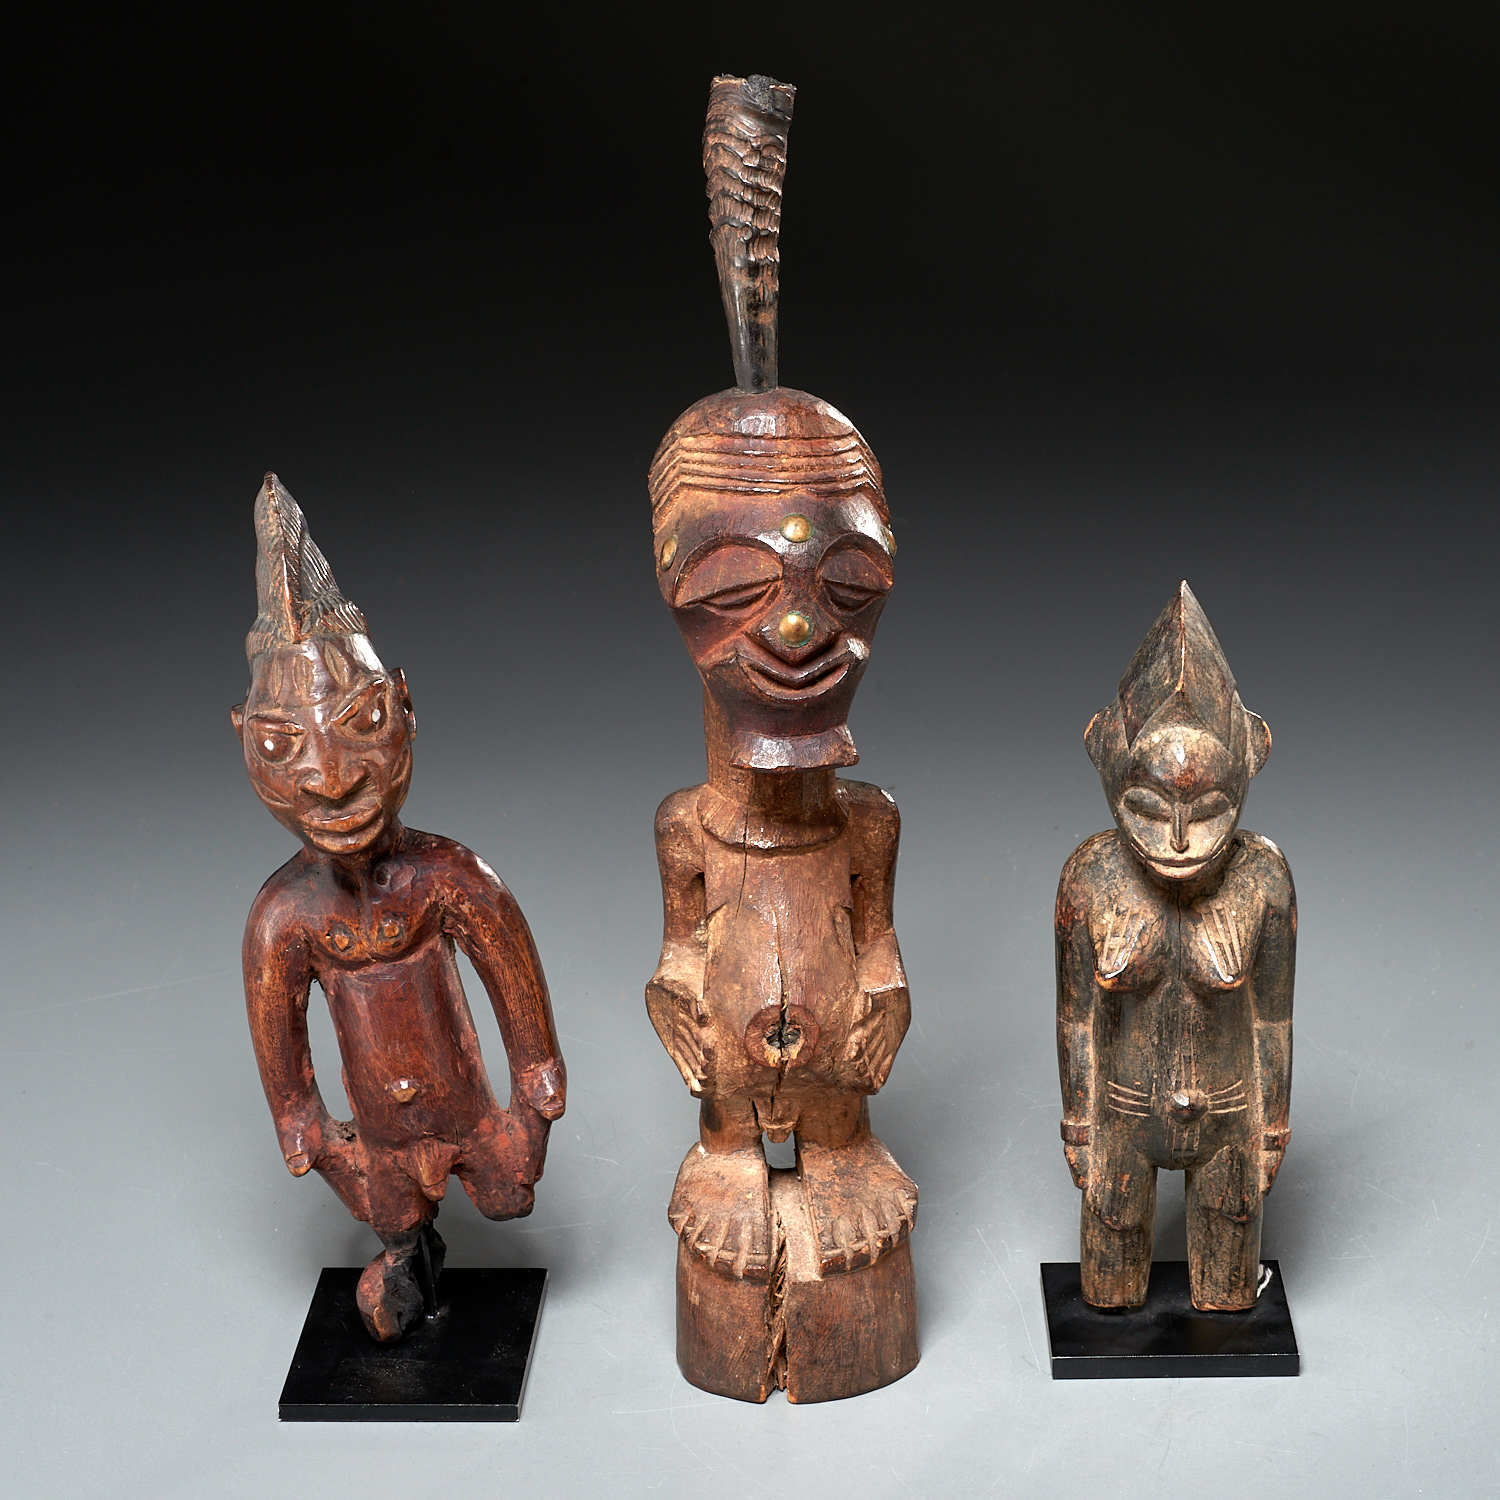  3 AFRICAN CARVED STANDING FIGURES  3626bc